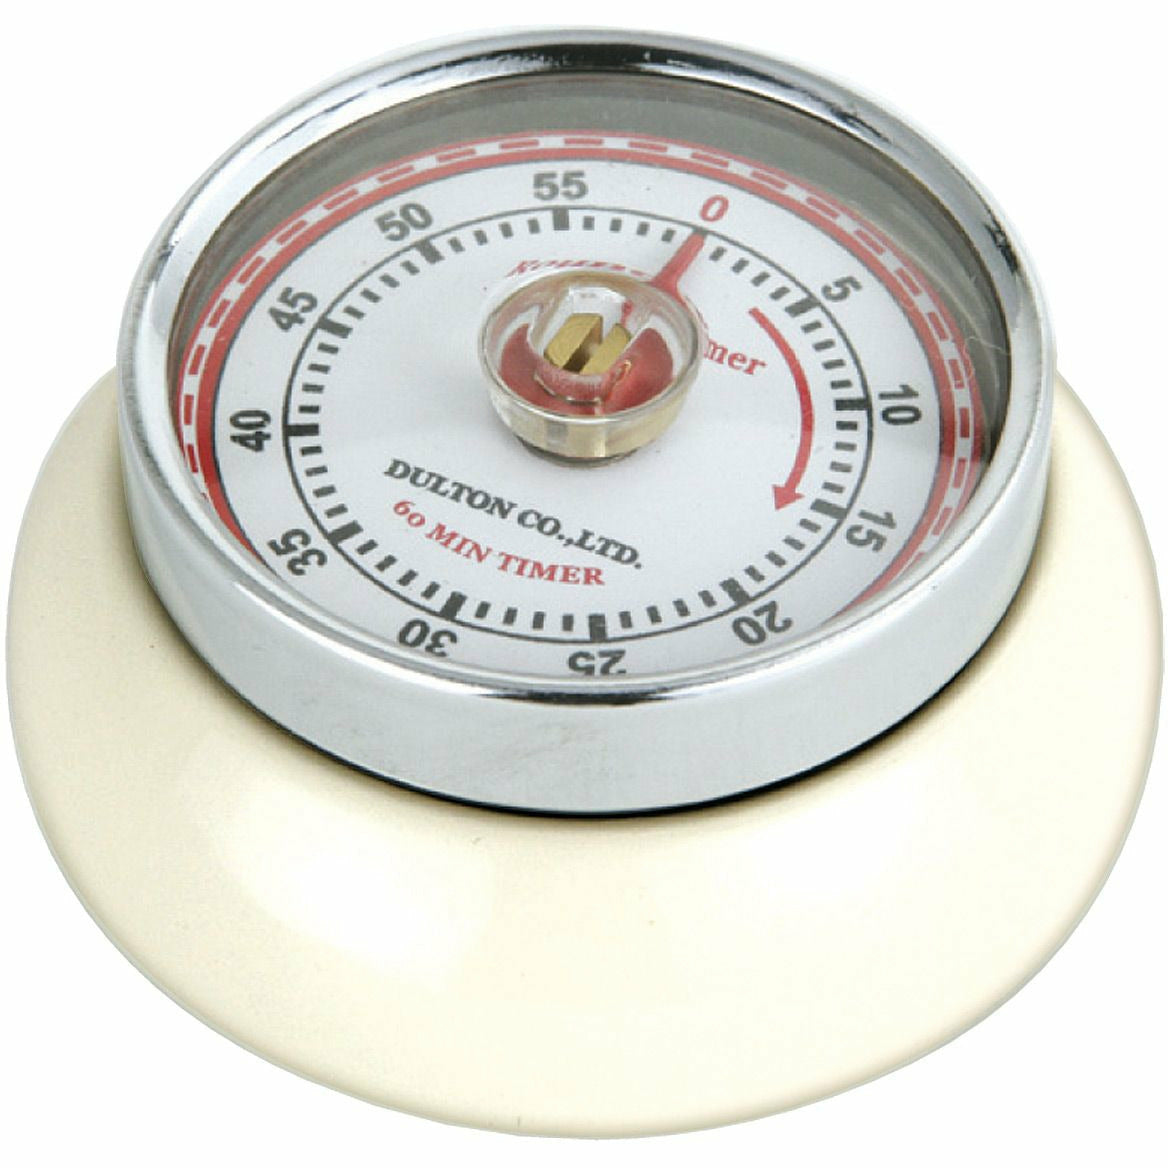 Kitchen Tools & Gadgets Kitchen Timers 60 Minute Square Mechanical Kitchen  Cooking Timer Food Preparation Baking Overtime Alarm